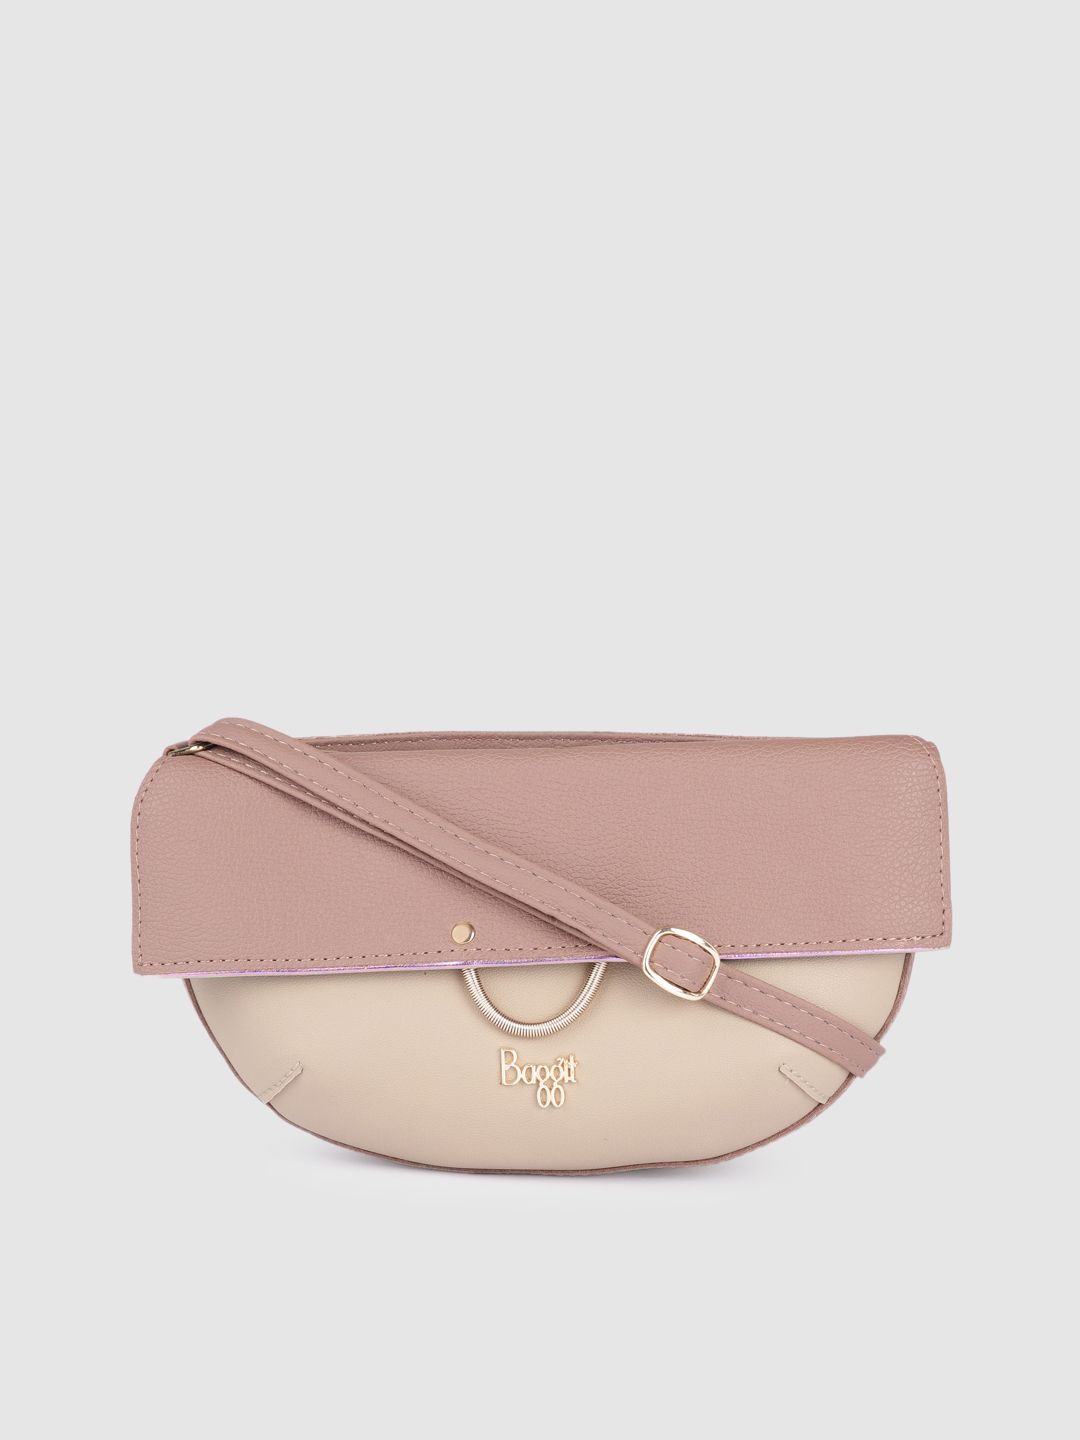 Baggit Women Pink & Cream-Coloured Colourblocked Structured Sling Bag Price in India